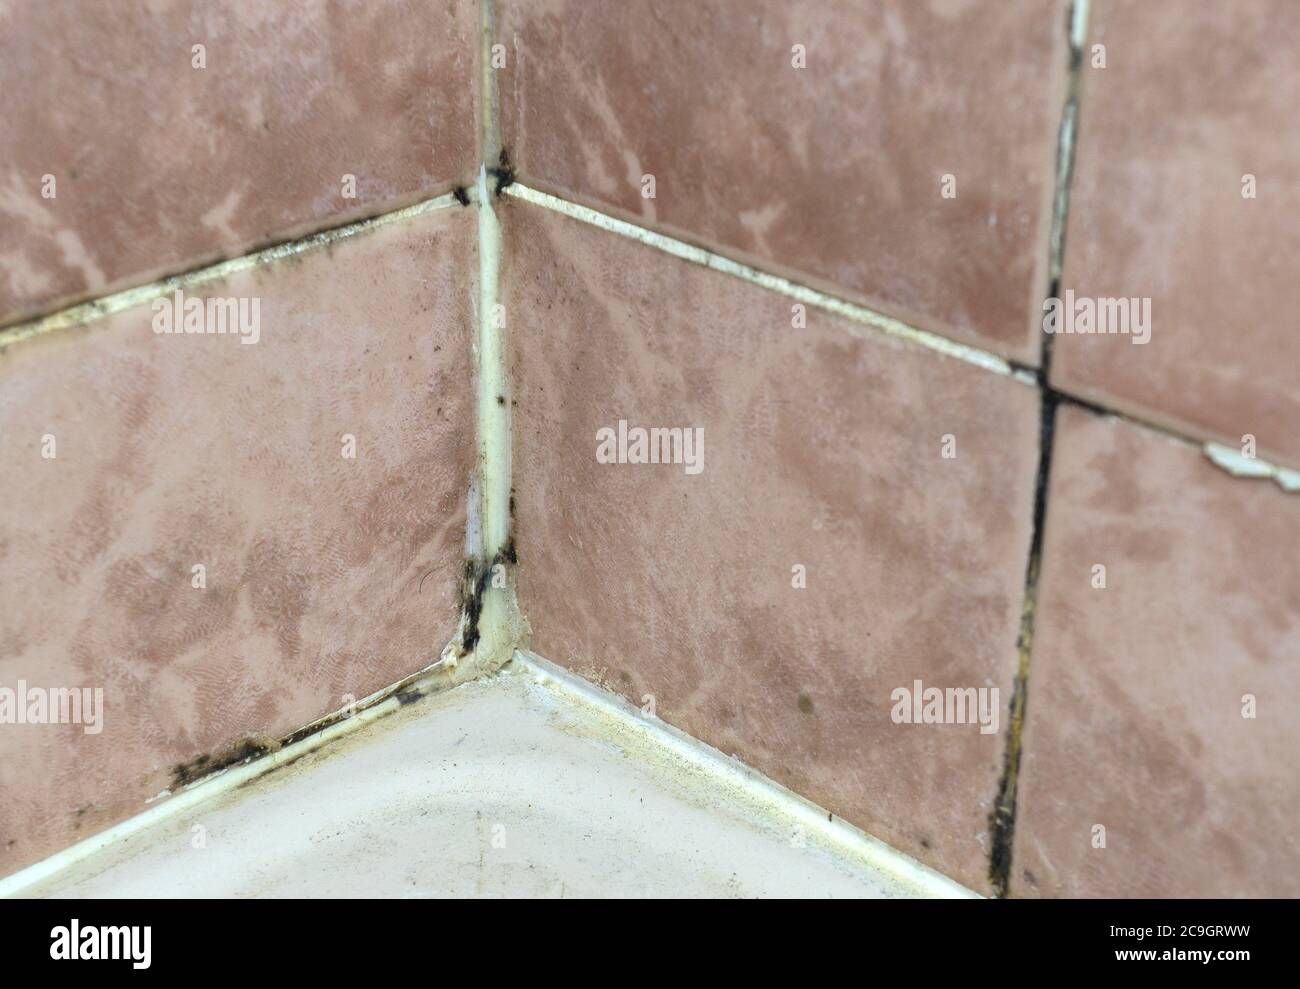 Black mold growing on shower grouted joints tile in bathroom wall corner Stock Photo